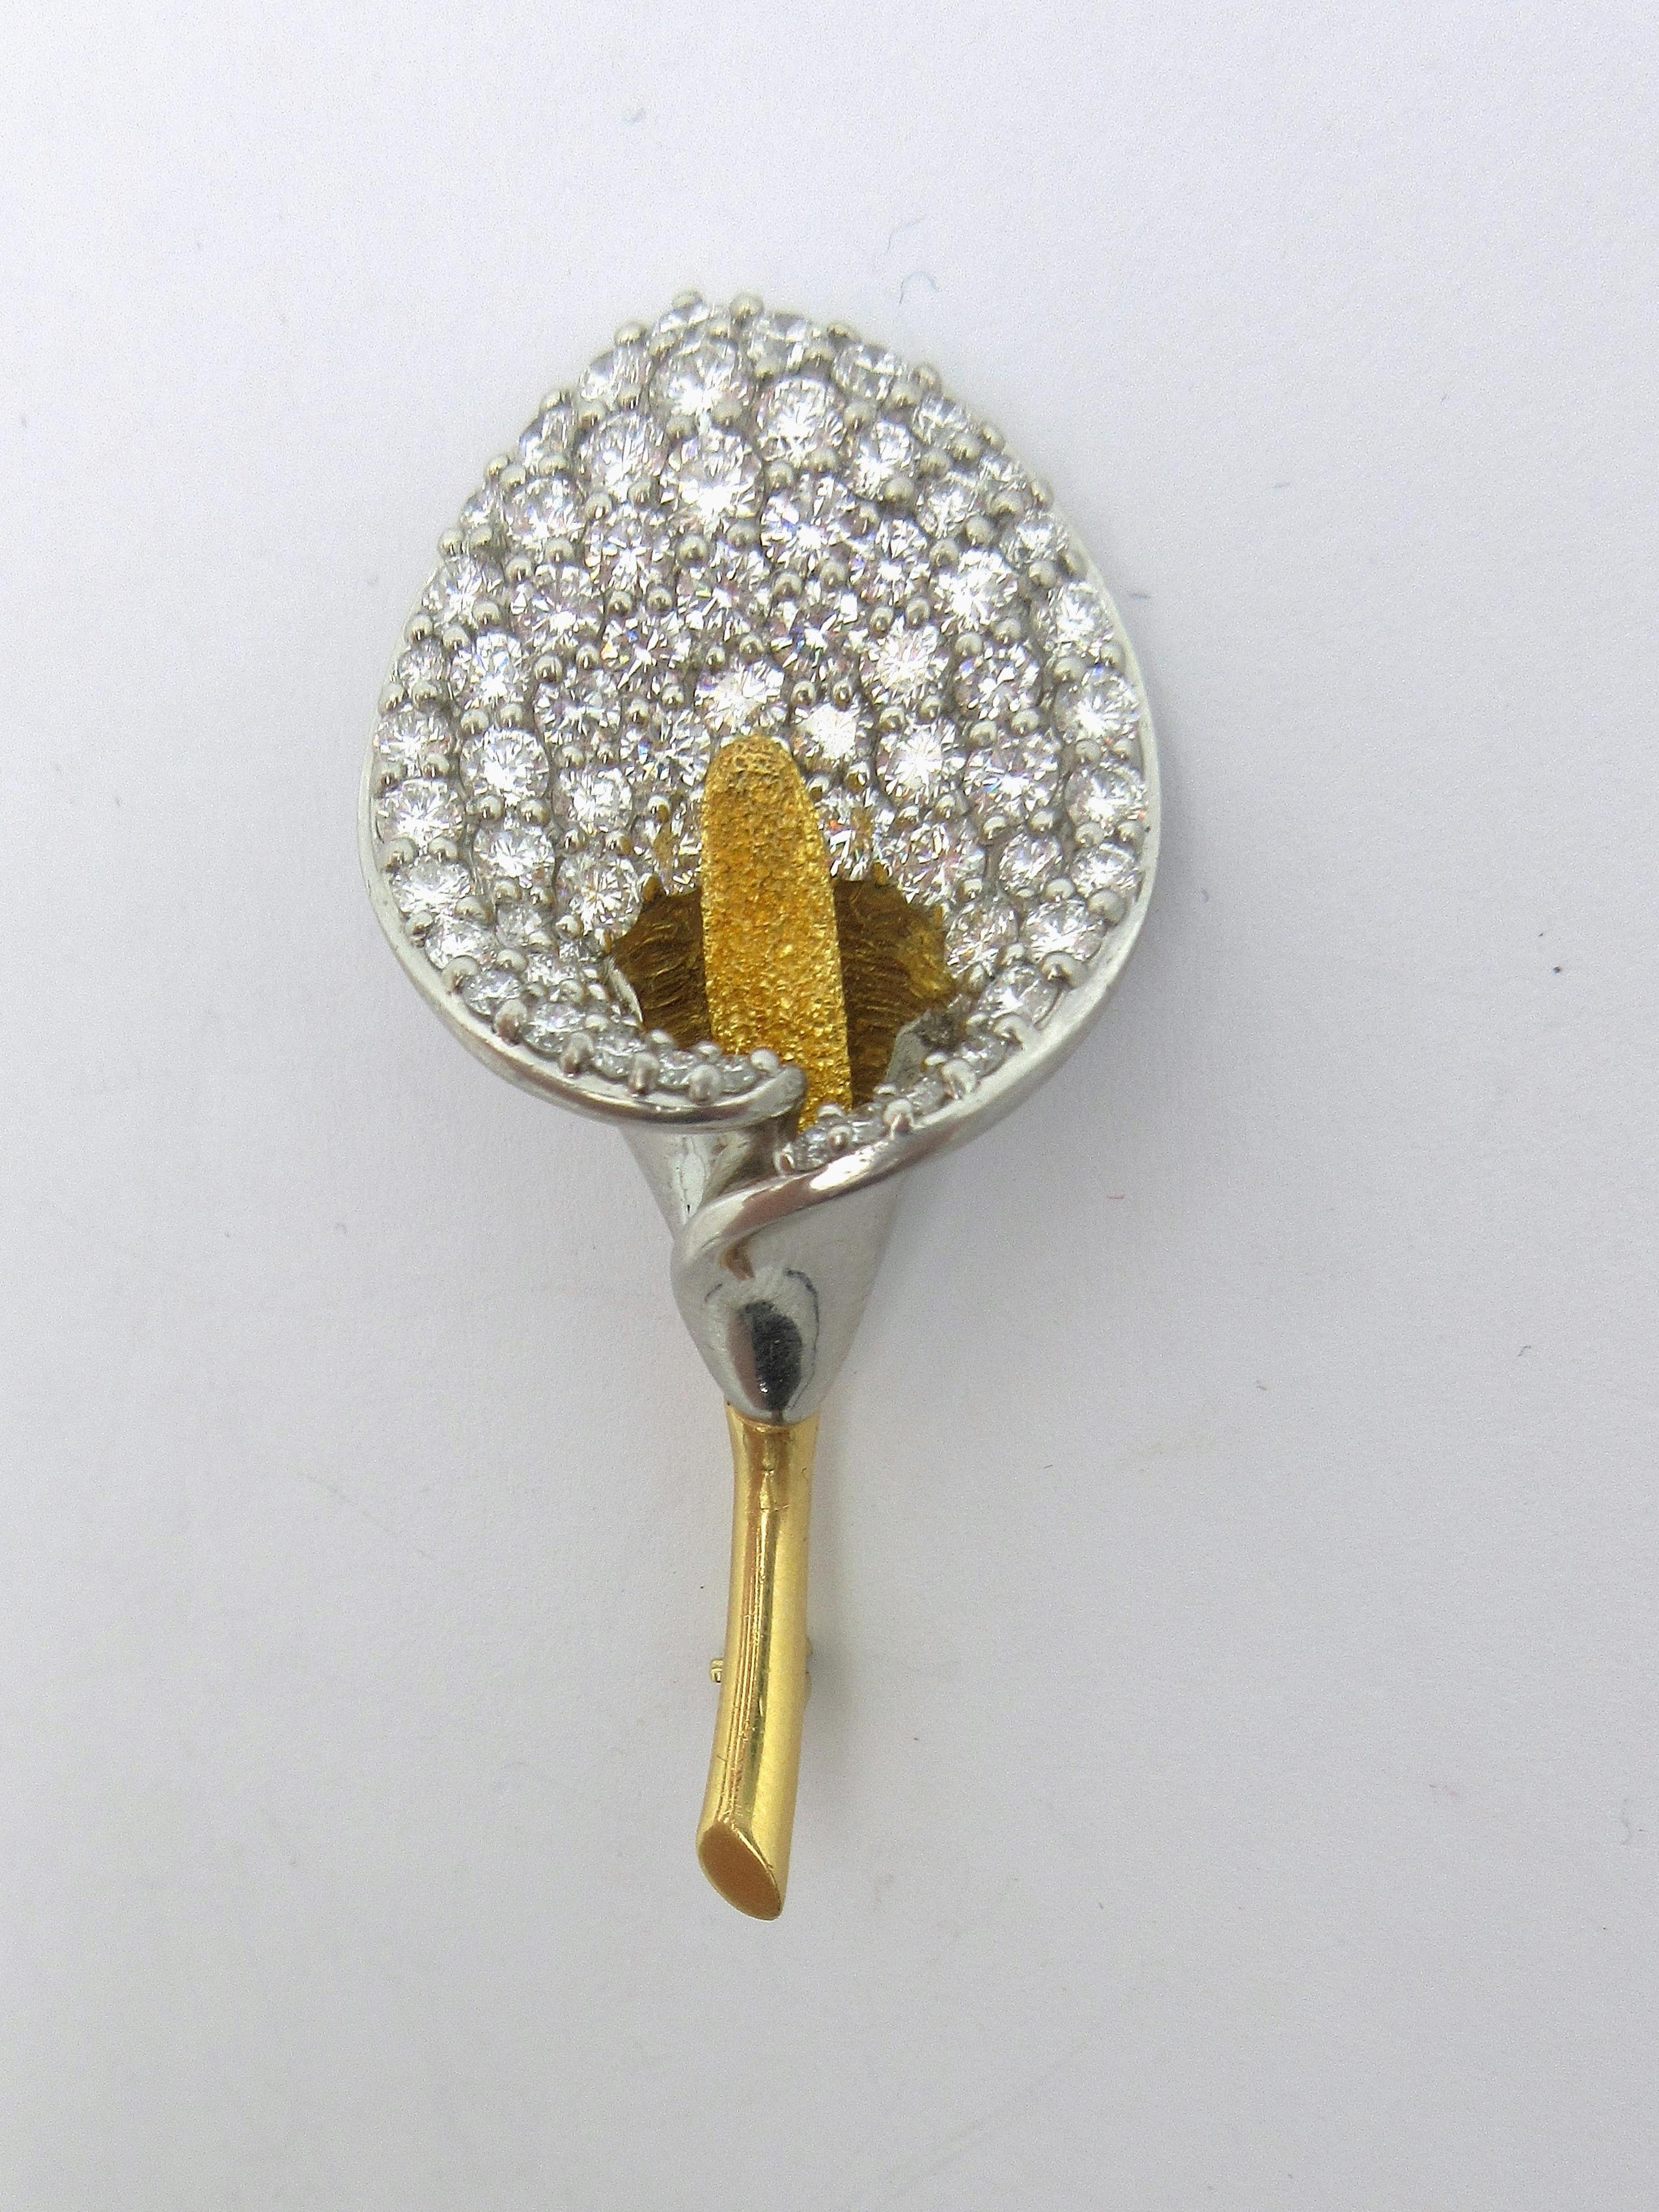 This exquisite brooch by designer Mark Patterson was made to depict a calla lily.  The flower is made in expert detail, with an 18k yellow gold stem and stadix, and platinum spathe.  The spathe is pave-set with approximately 4.75cttw of round